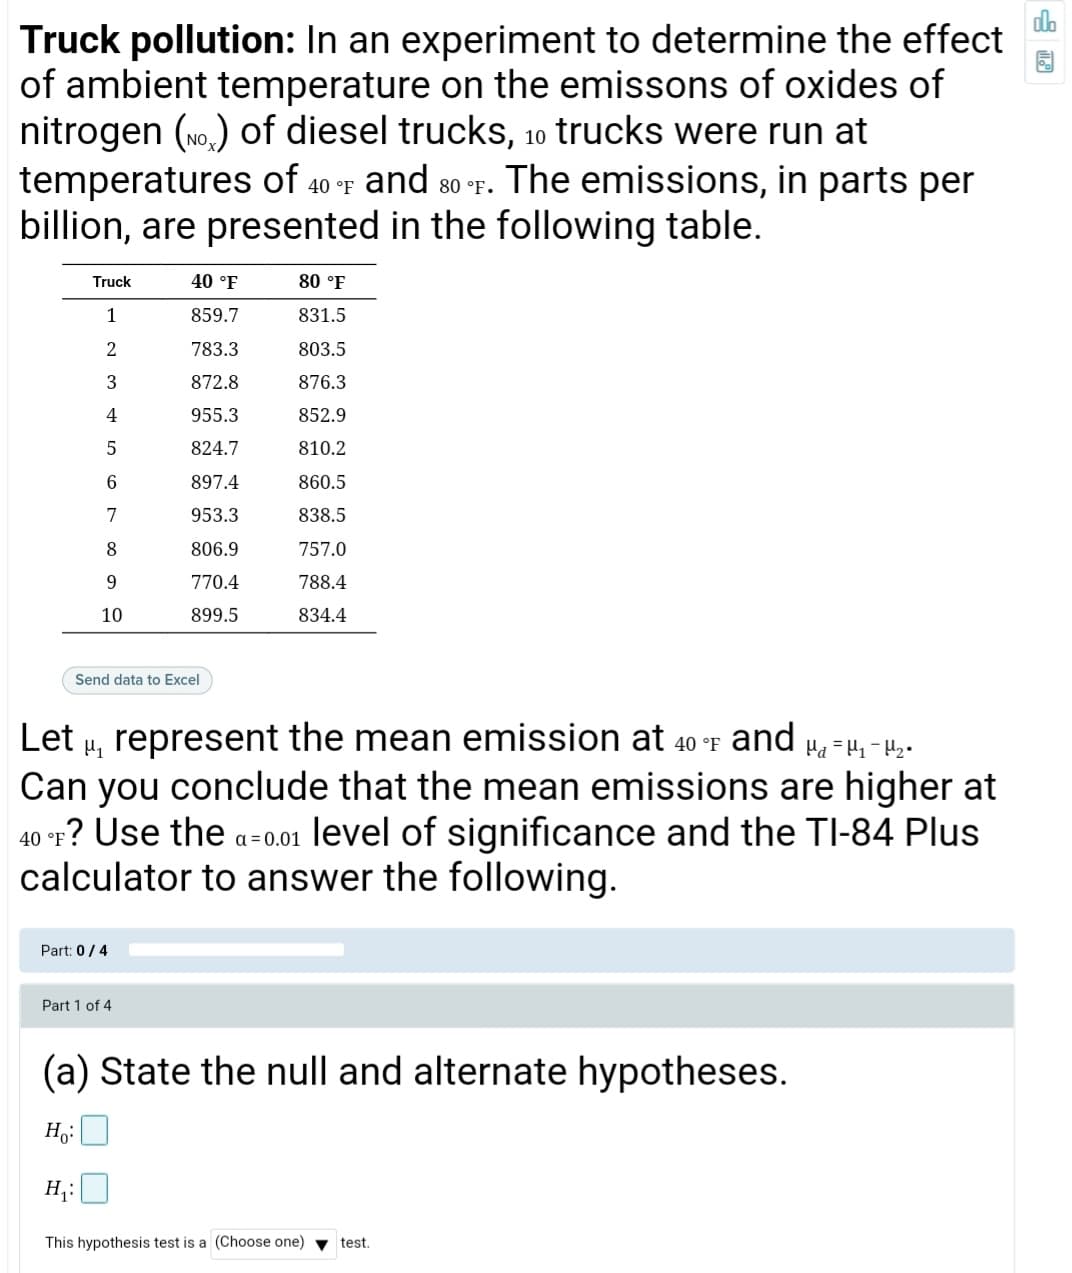 Truck pollution: In an experiment to determine the effect
of ambient temperature on the emissons of oxides of
nitrogen (wo.) of diesel trucks, 10 trucks were run at
temperatures of and The emissions, in parts per
billion, are presented in the following table.
40 °F
80 °F.
Truck
40 °F
80 °F
1
859.7
831.5
2
783.3
803.5
872.8
876.3
4
955.3
852.9
5
824.7
810.2
6.
897.4
860.5
7
953.3
838.5
8
806.9
757.0
9.
770.4
788.4
10
899.5
834.4
Send data to Excel
Let u, represent the mean emission at 40 °F and H=4,-42-
Can you conclude that the mean emissions are higher at
40 °r? Use the a-0.01 level of significance and the TI-84 Plus
calculator to answer the following.
Part: 0/4
Part 1 of 4
(a) State the null and alternate hypotheses.
H,:
H;:
This hypothesis test is a (Choose one)
test.
